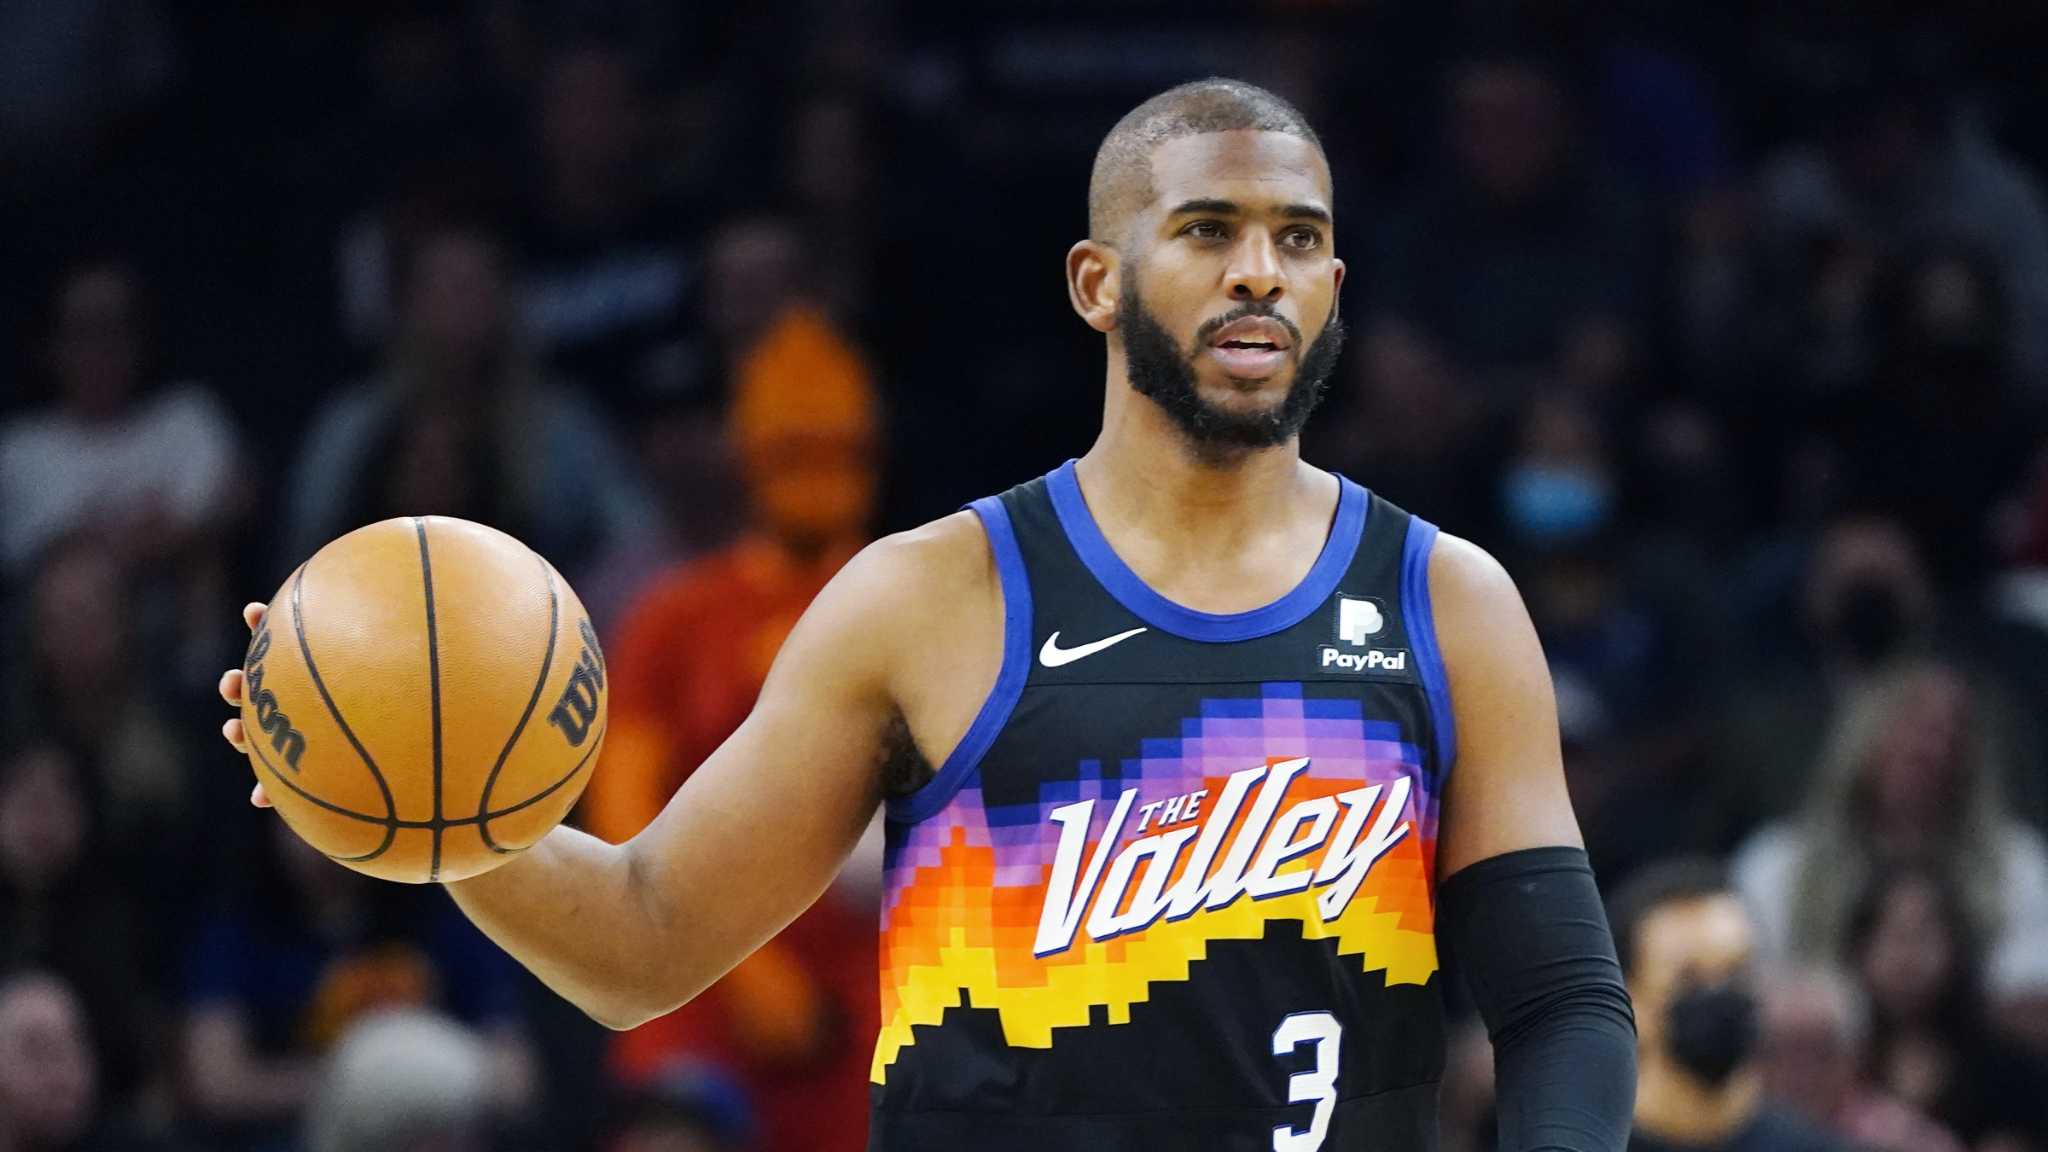 chris paul jersey suns the valley